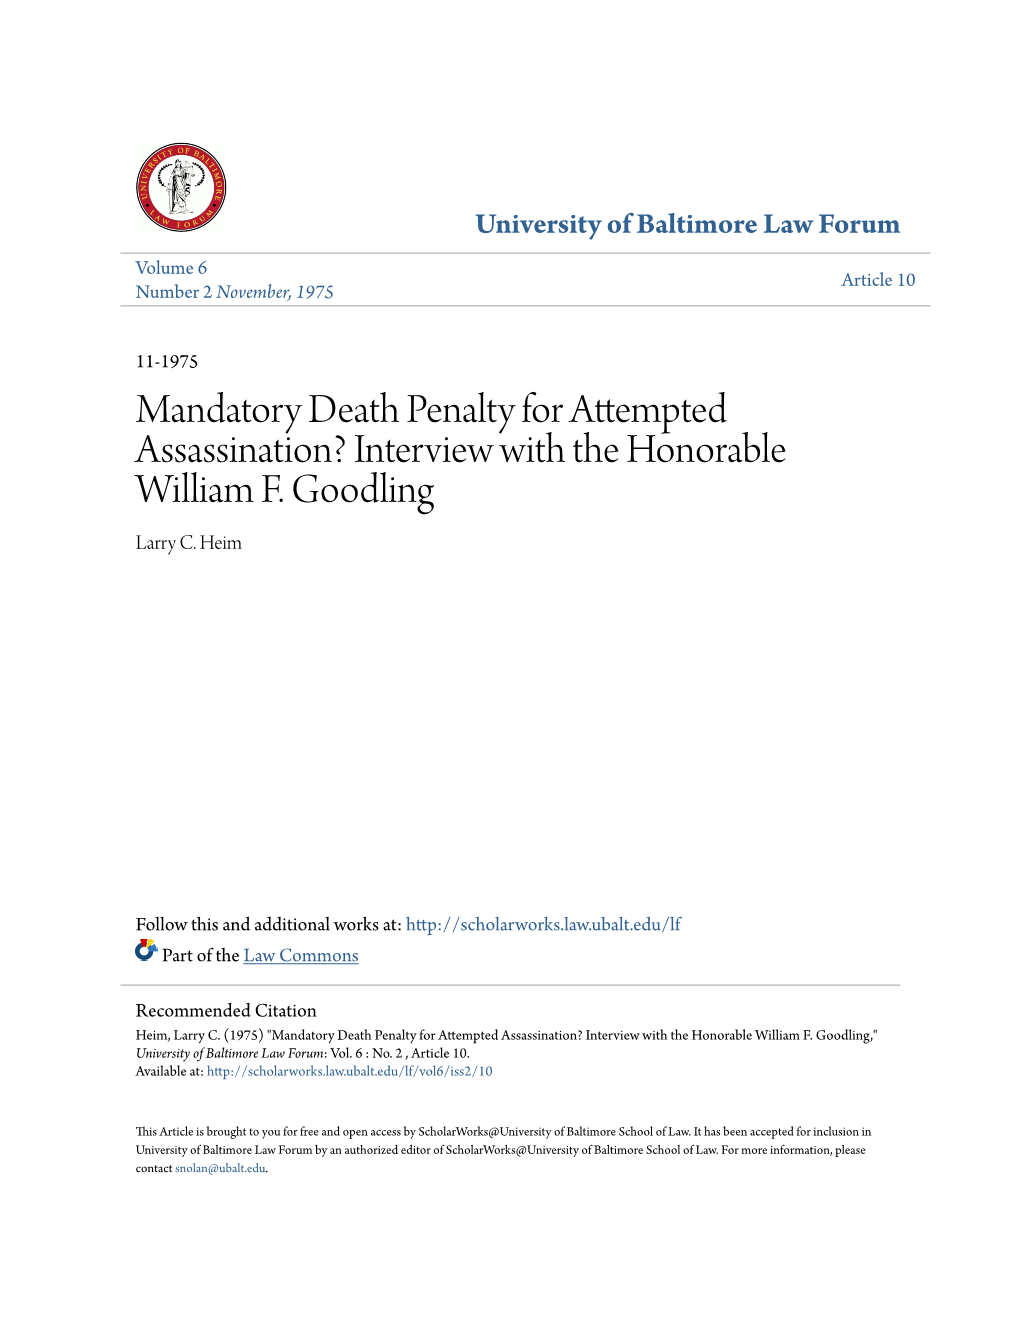 Mandatory Death Penalty for Attempted Assassination? Interview with the Honorable William F